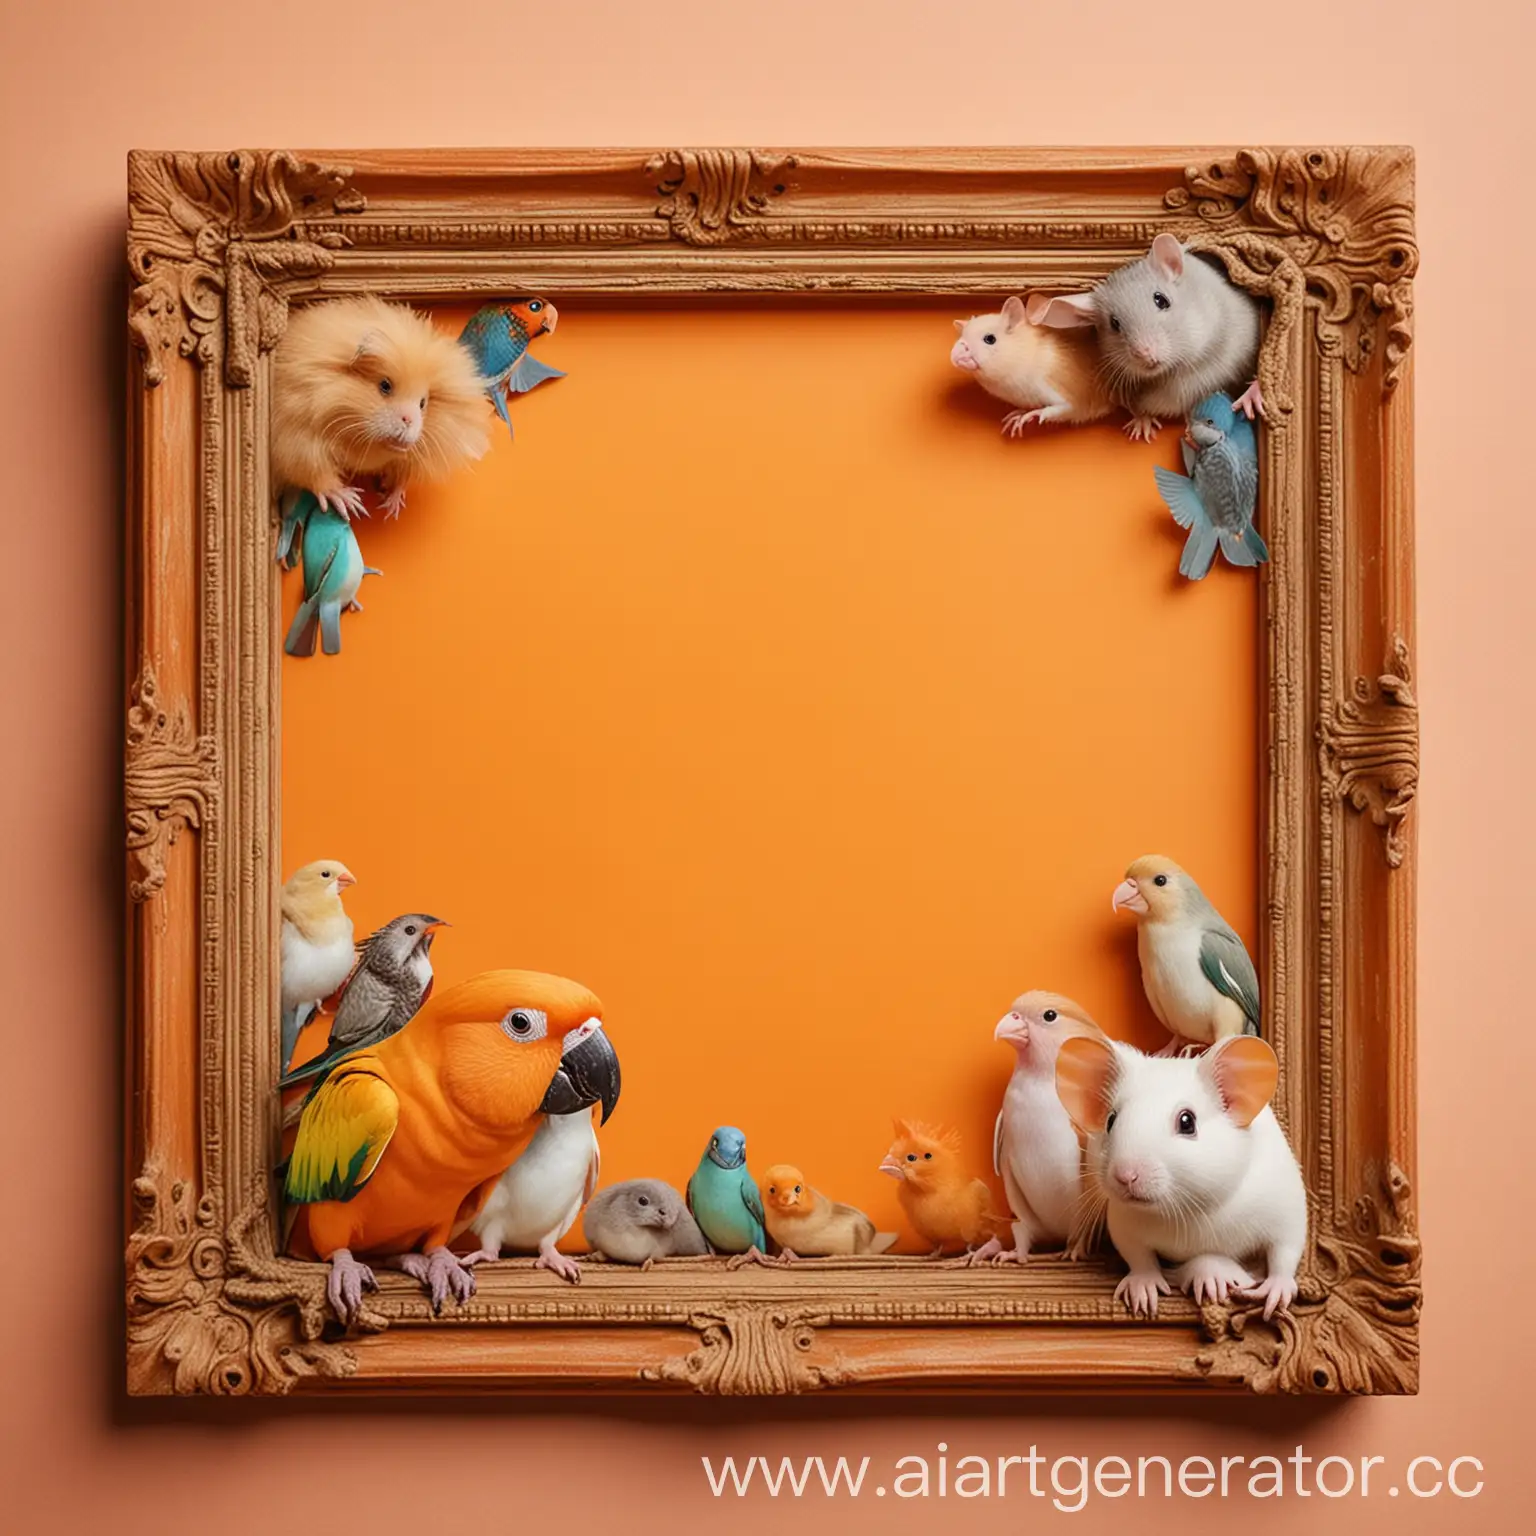 Colorful-Animals-on-Orange-Background-with-Framed-Text